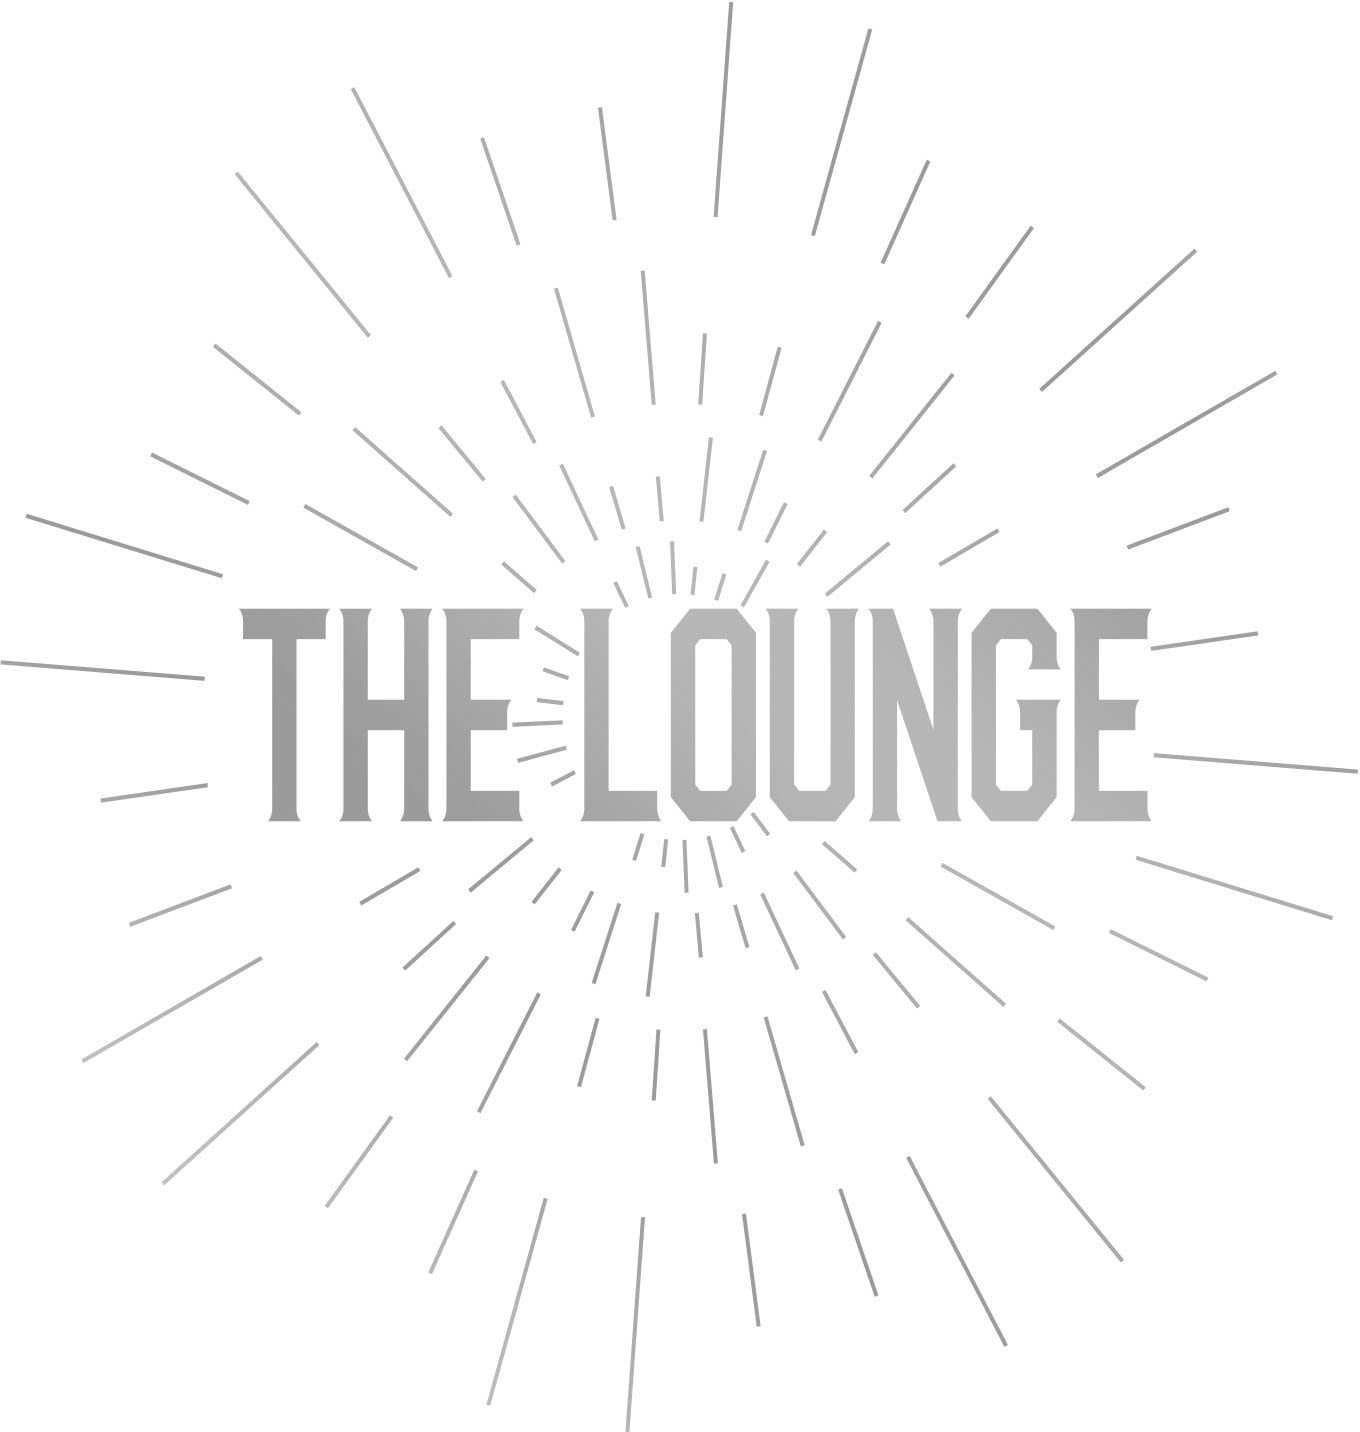 queence Wandtattoo »THE LOUNGE«, (1 St.) von queence